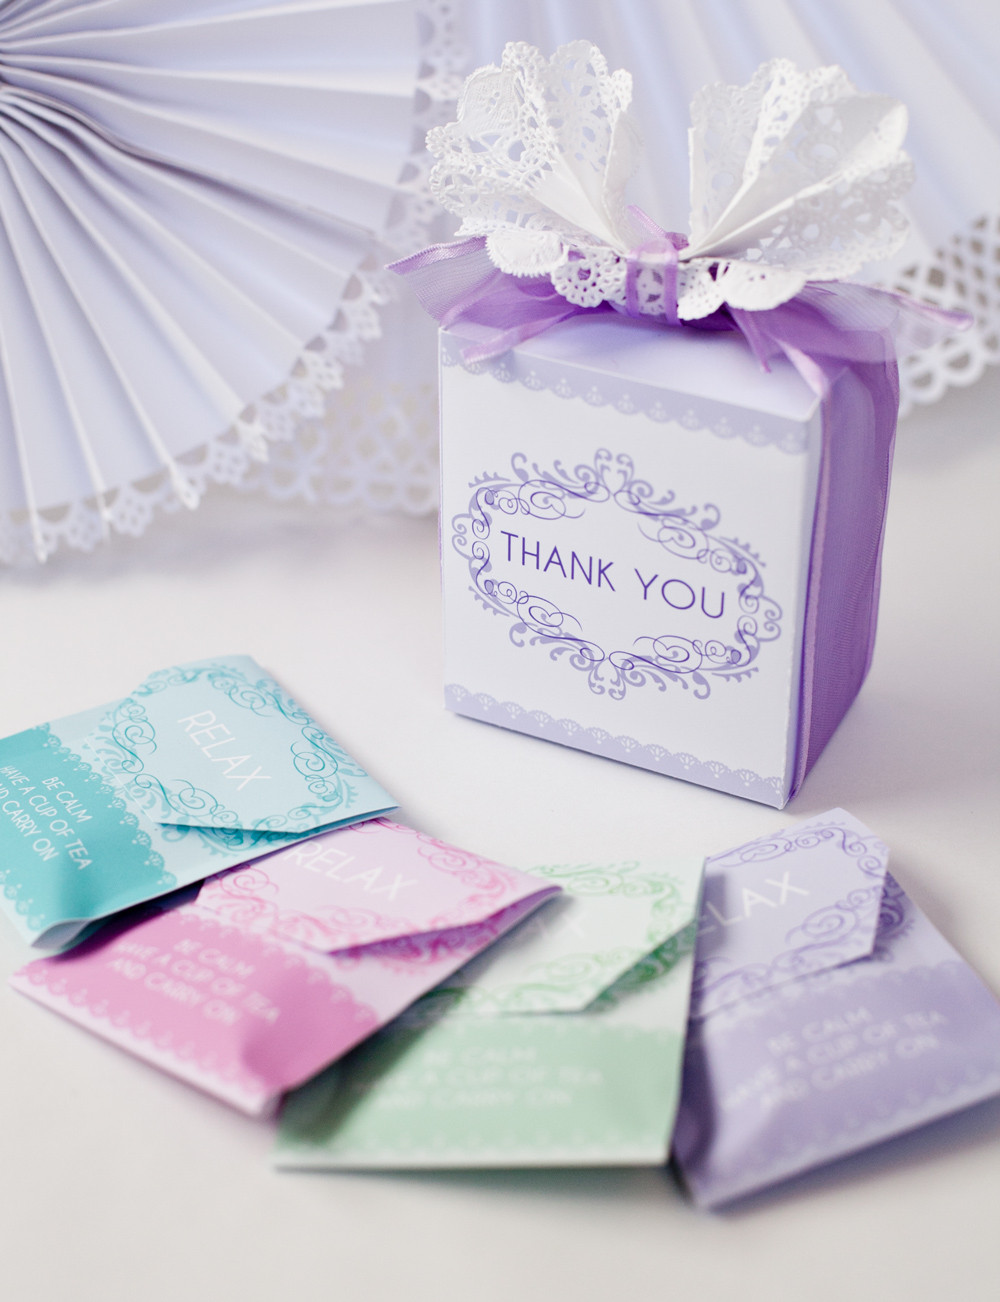 Baby Shower Party Favors Ideas DIY
 DIY Baby Shower Tea Party Favor Free Printable